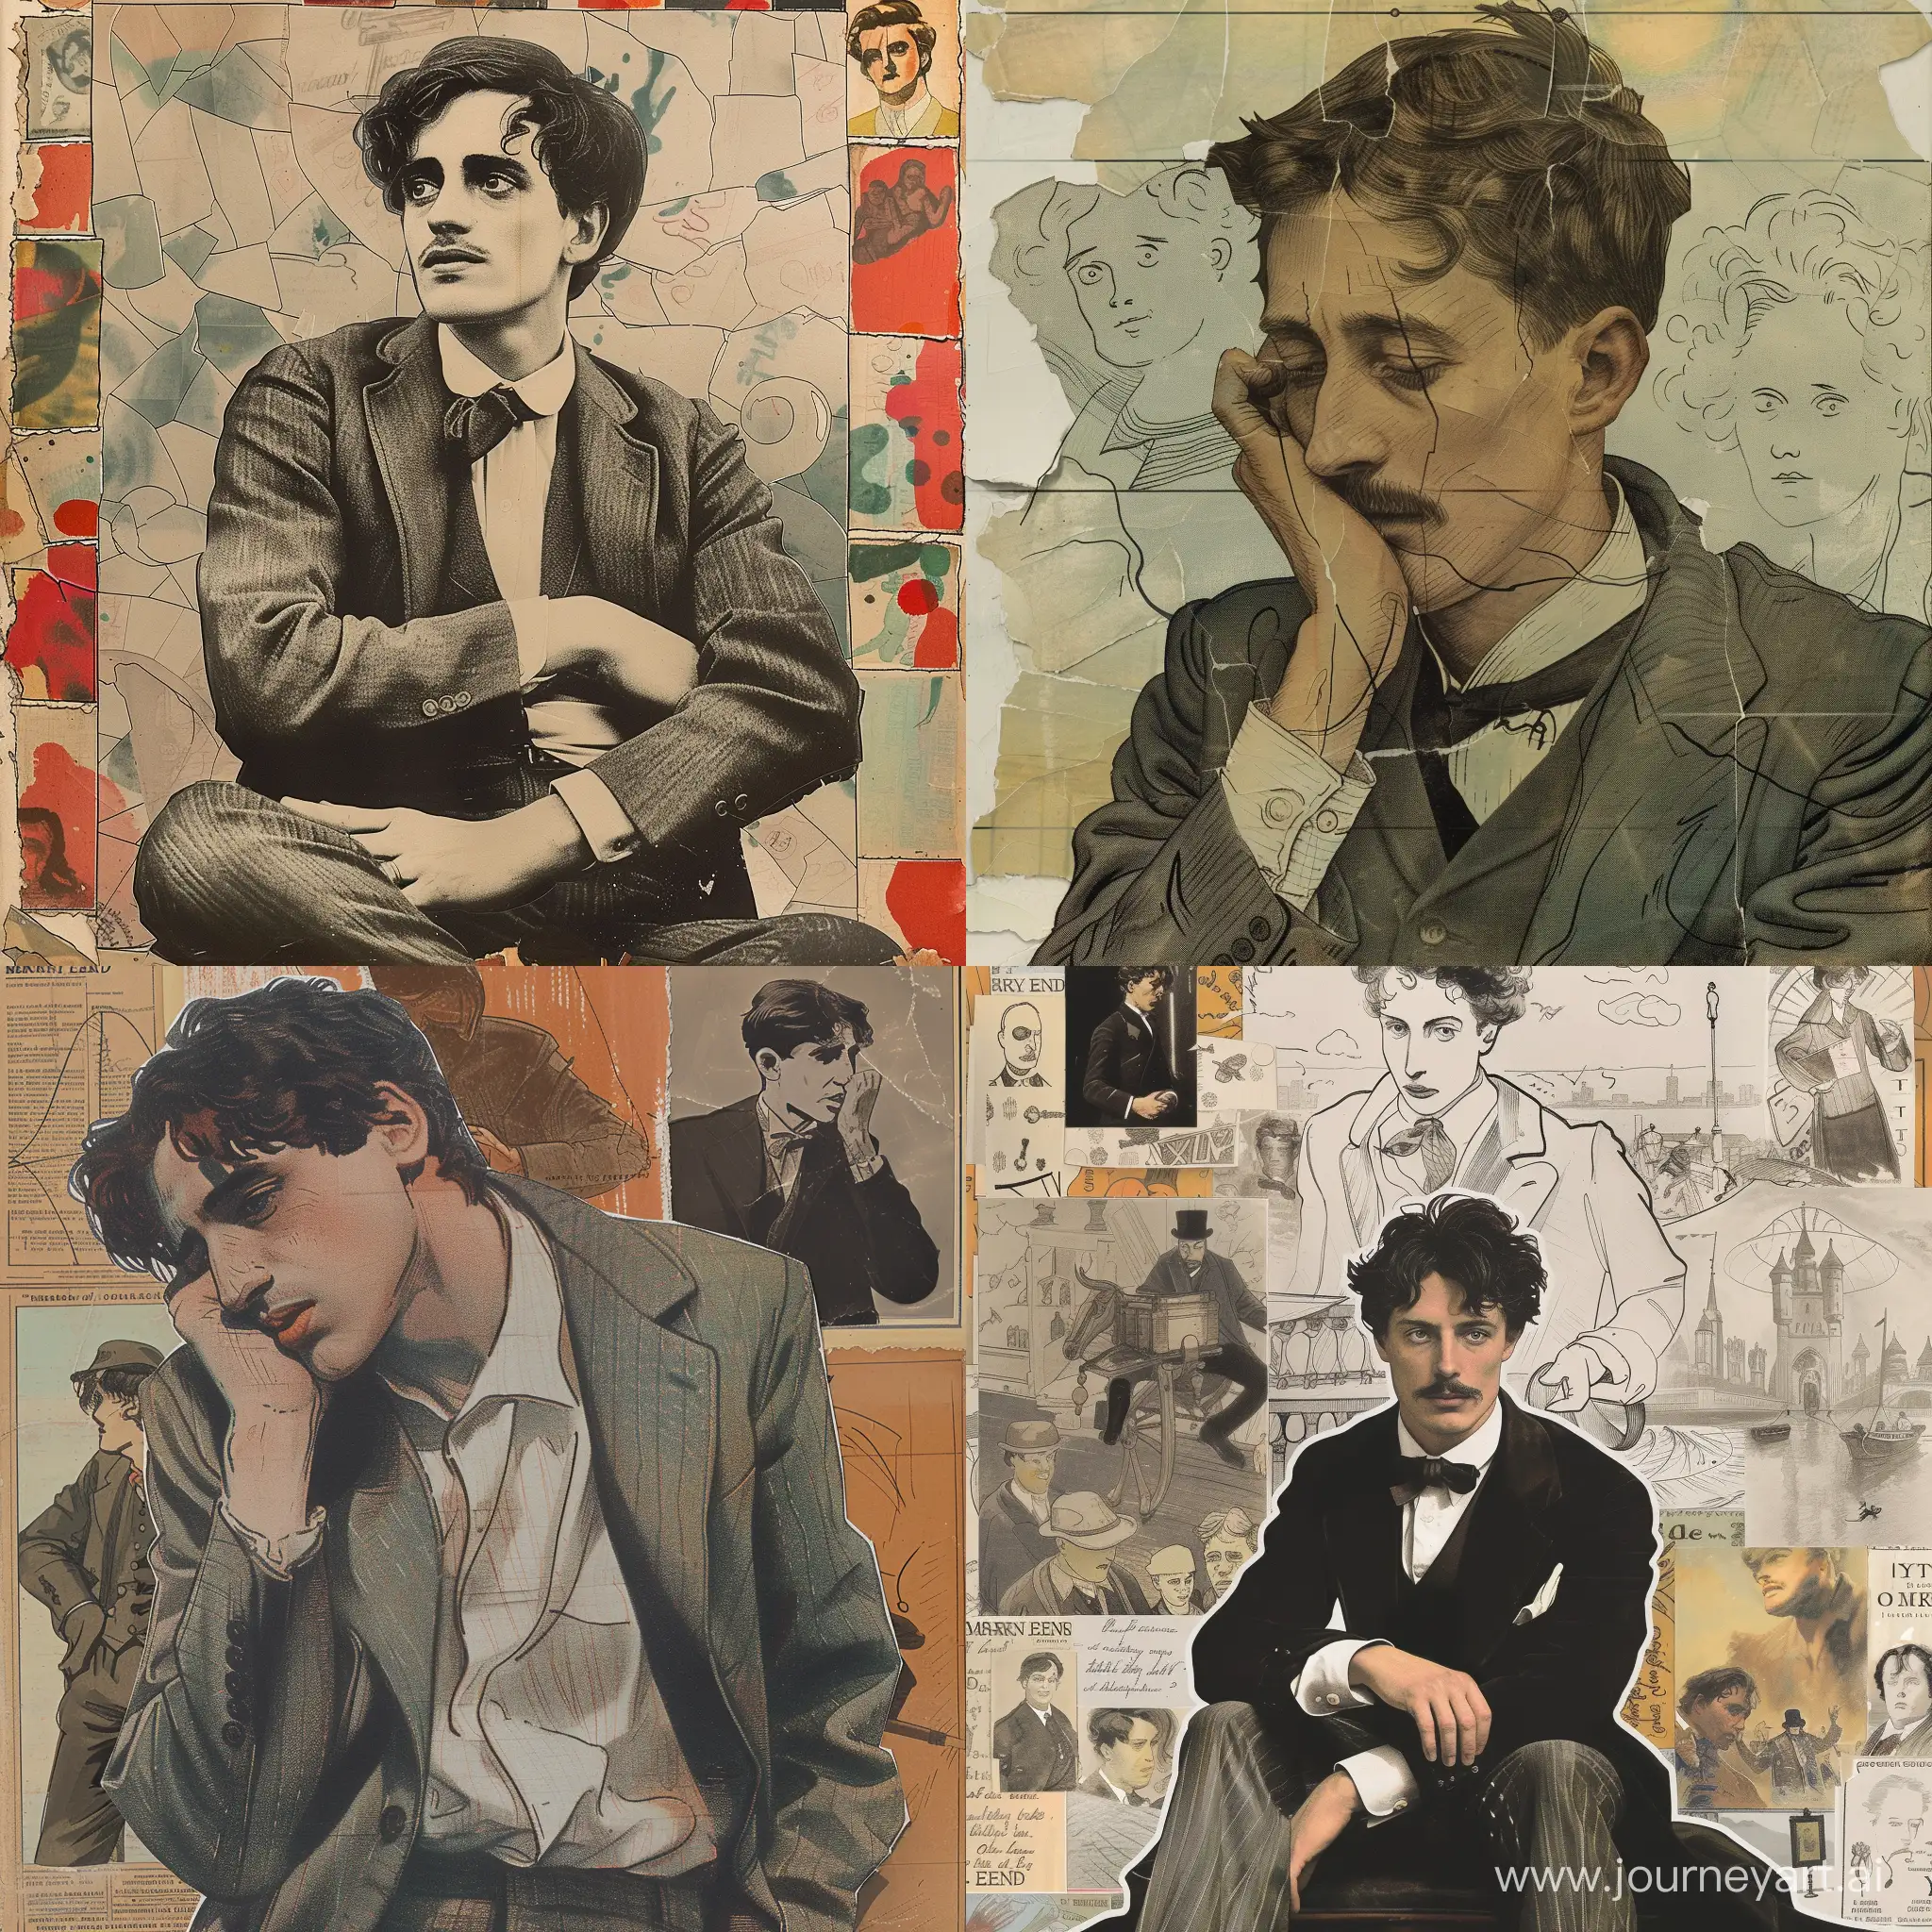 draw a collage about the reasons for Martin Eden's disappointments in fame at the beginning of the 20th century